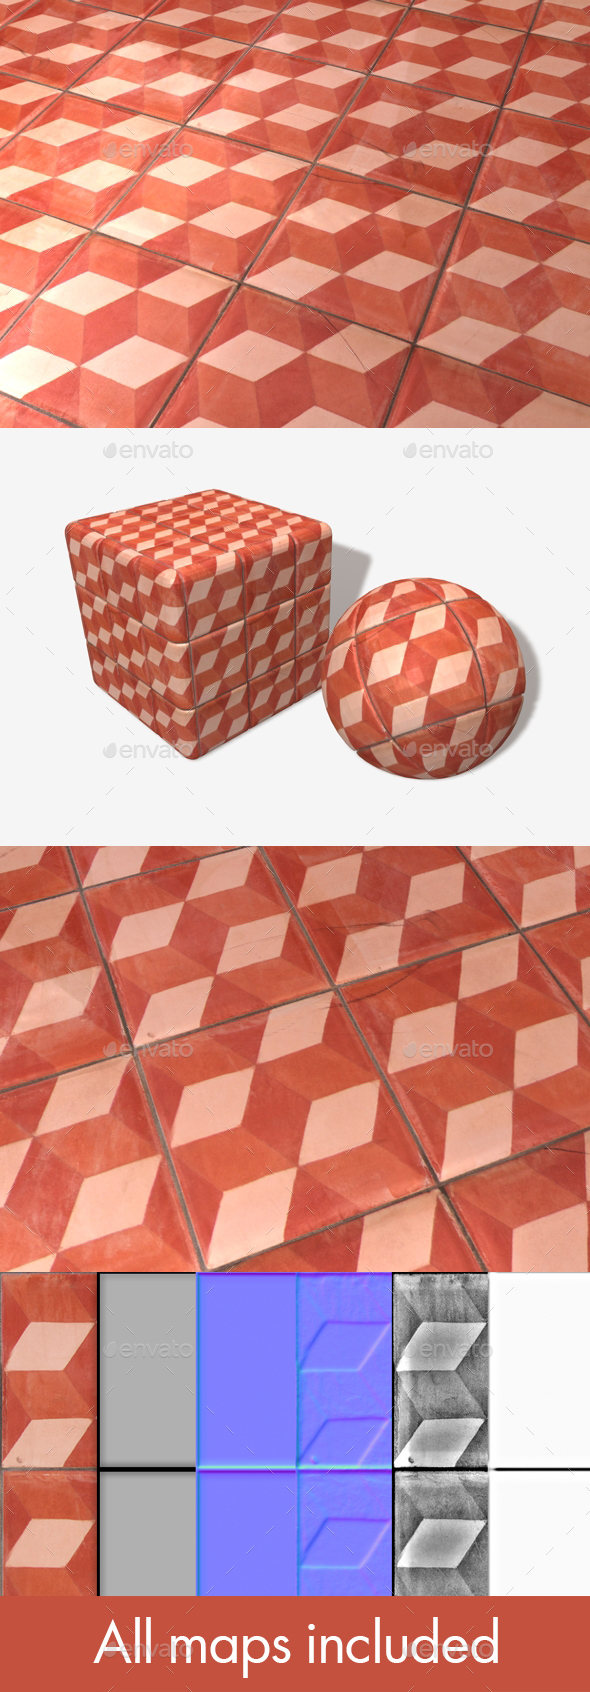 Red Cube Patterned - 3Docean 26951957